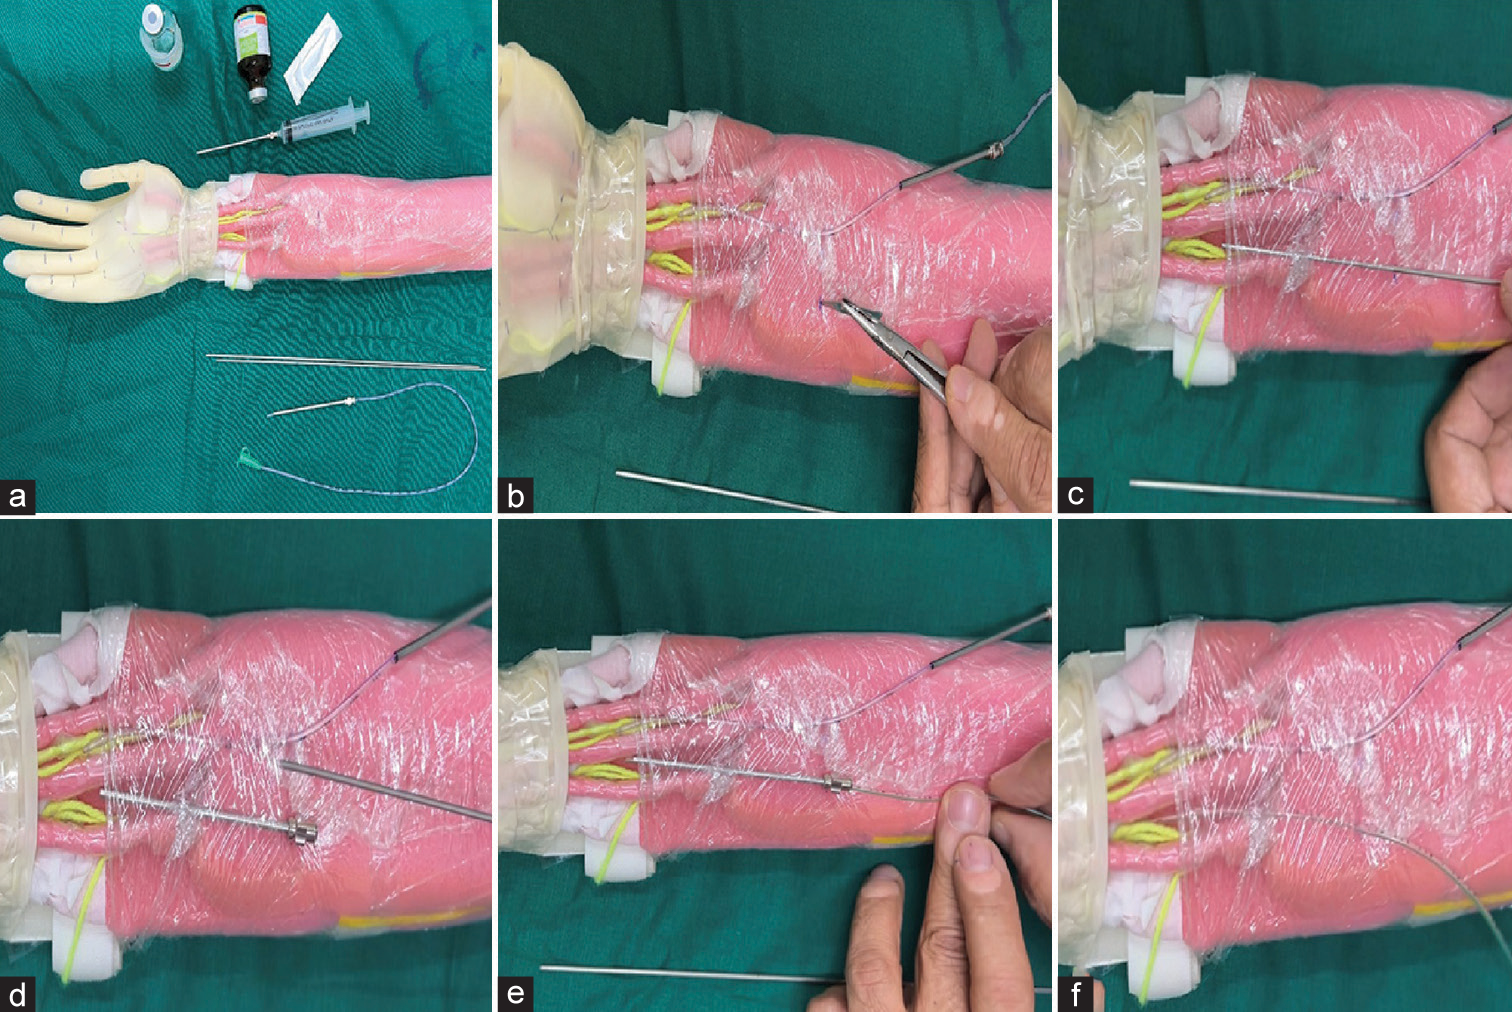 (a) Pictorial depiction of blocking ulnar nerve using a model with the required equipment. (b) Incision made at the proximal marking point. (c) Negotiation of K-wire under the deep fascia. (d) Needle in situ after removing the wire. (e) Insertion of the infant feeding tube. (f) Showing infant feeding tube is in the appropriate place.